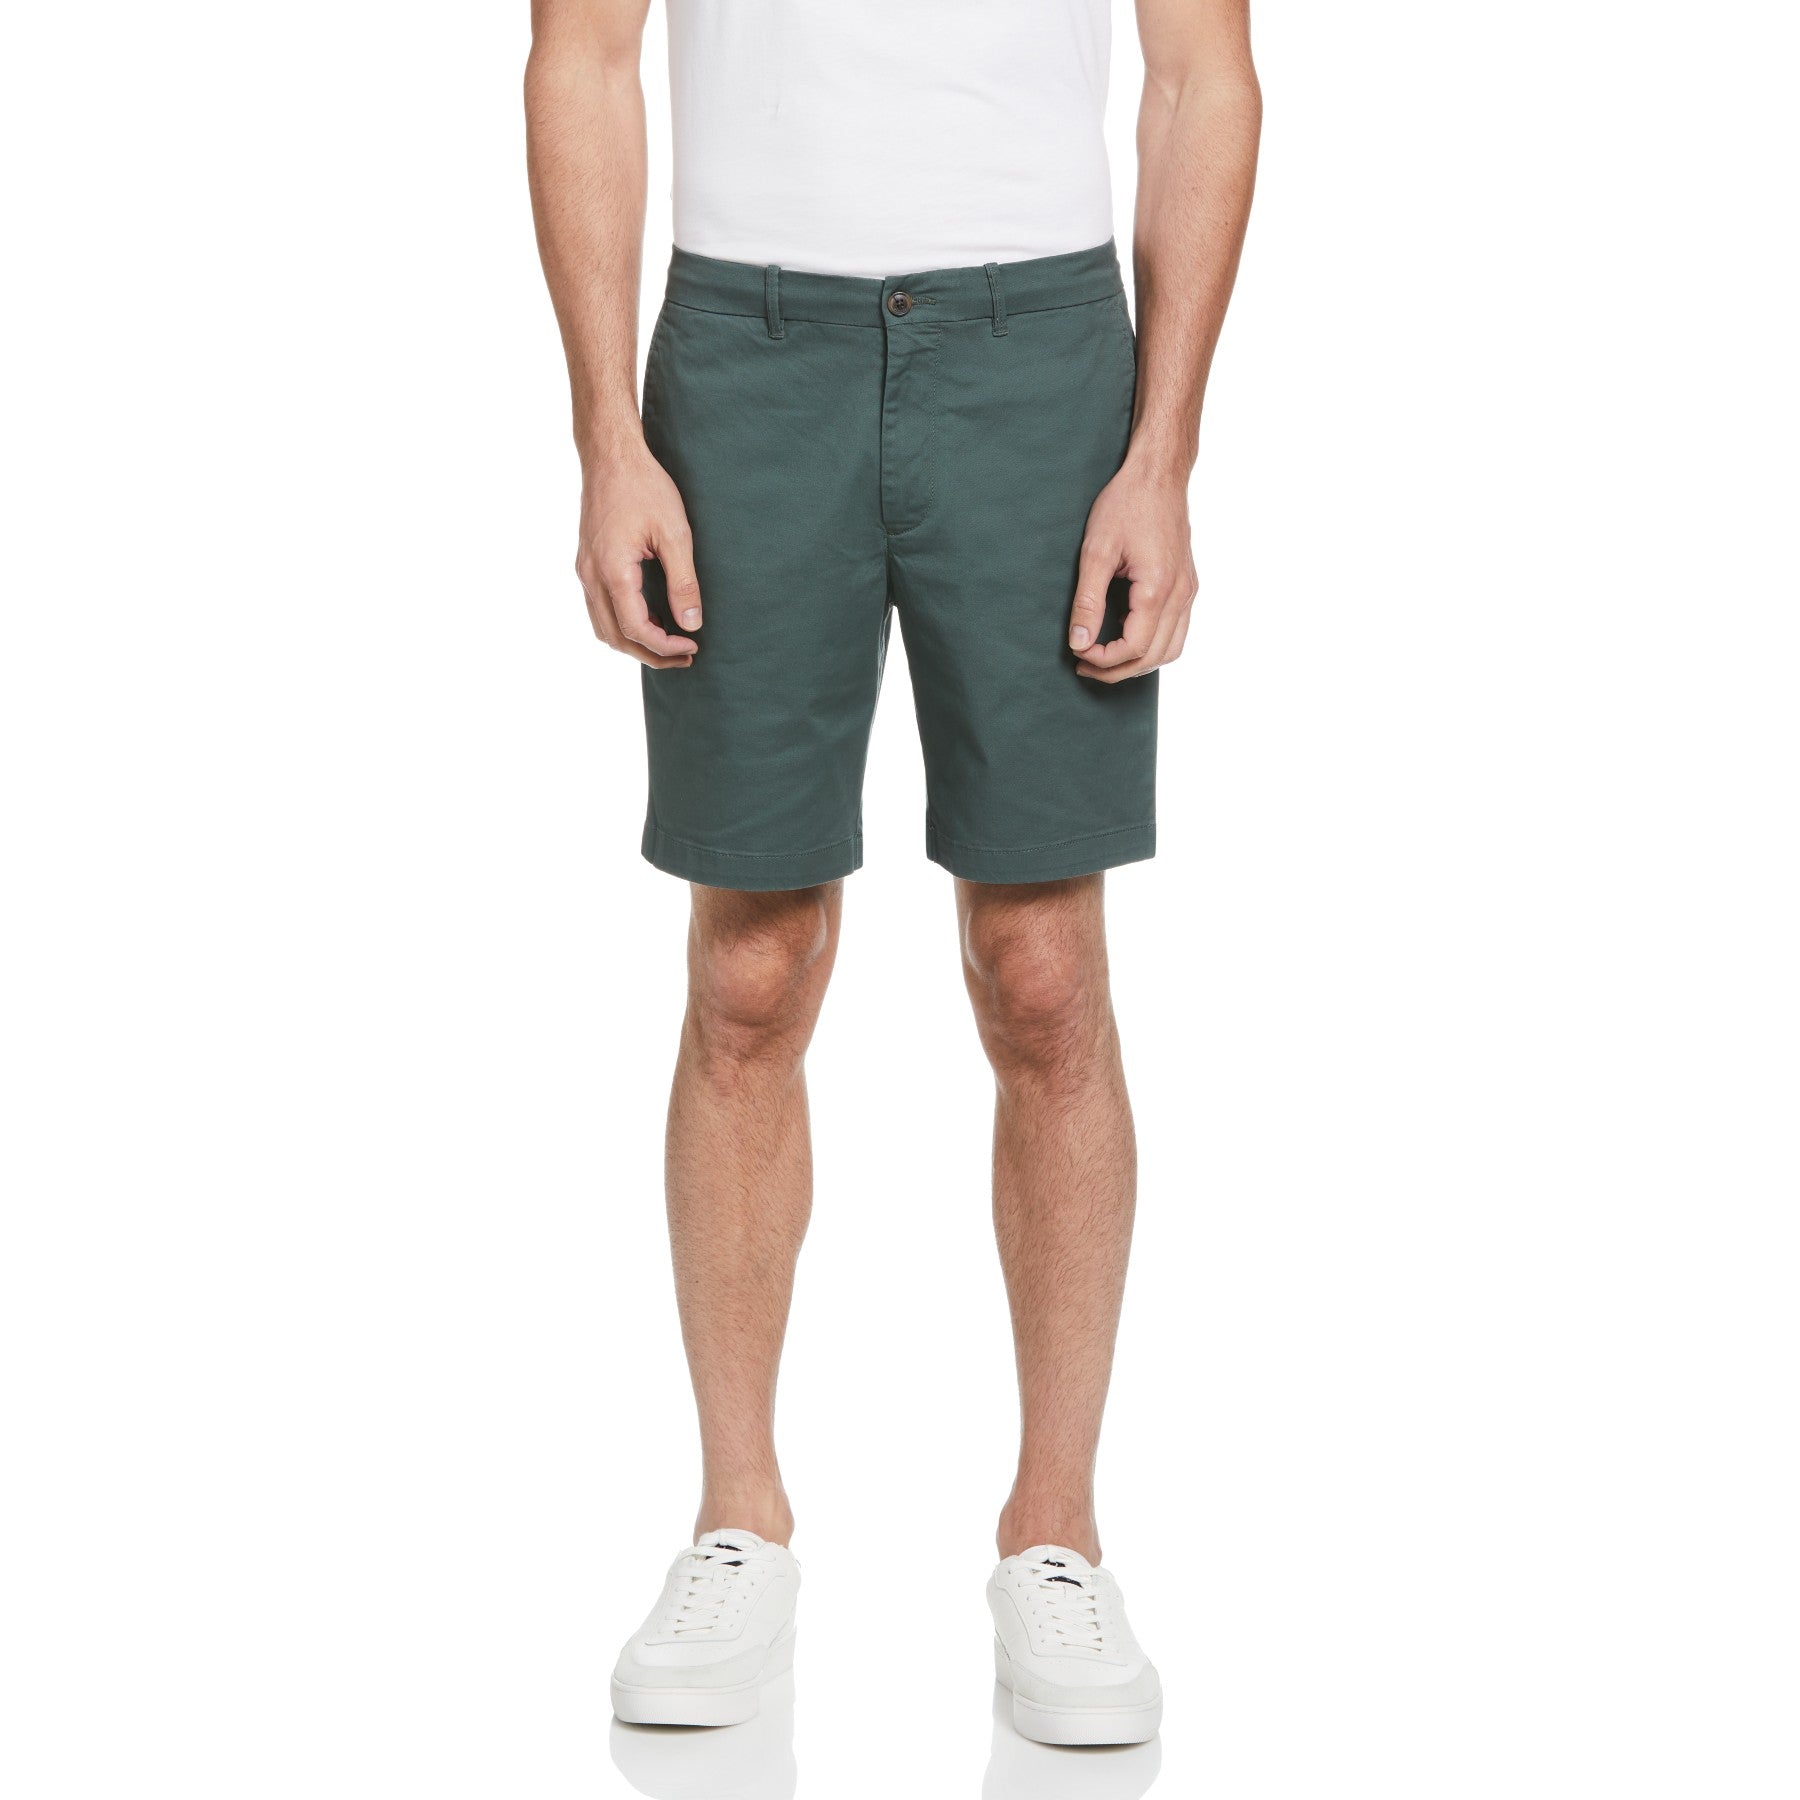 View Recycled Cotton Stretch Chino Shorts In Urban Chic information